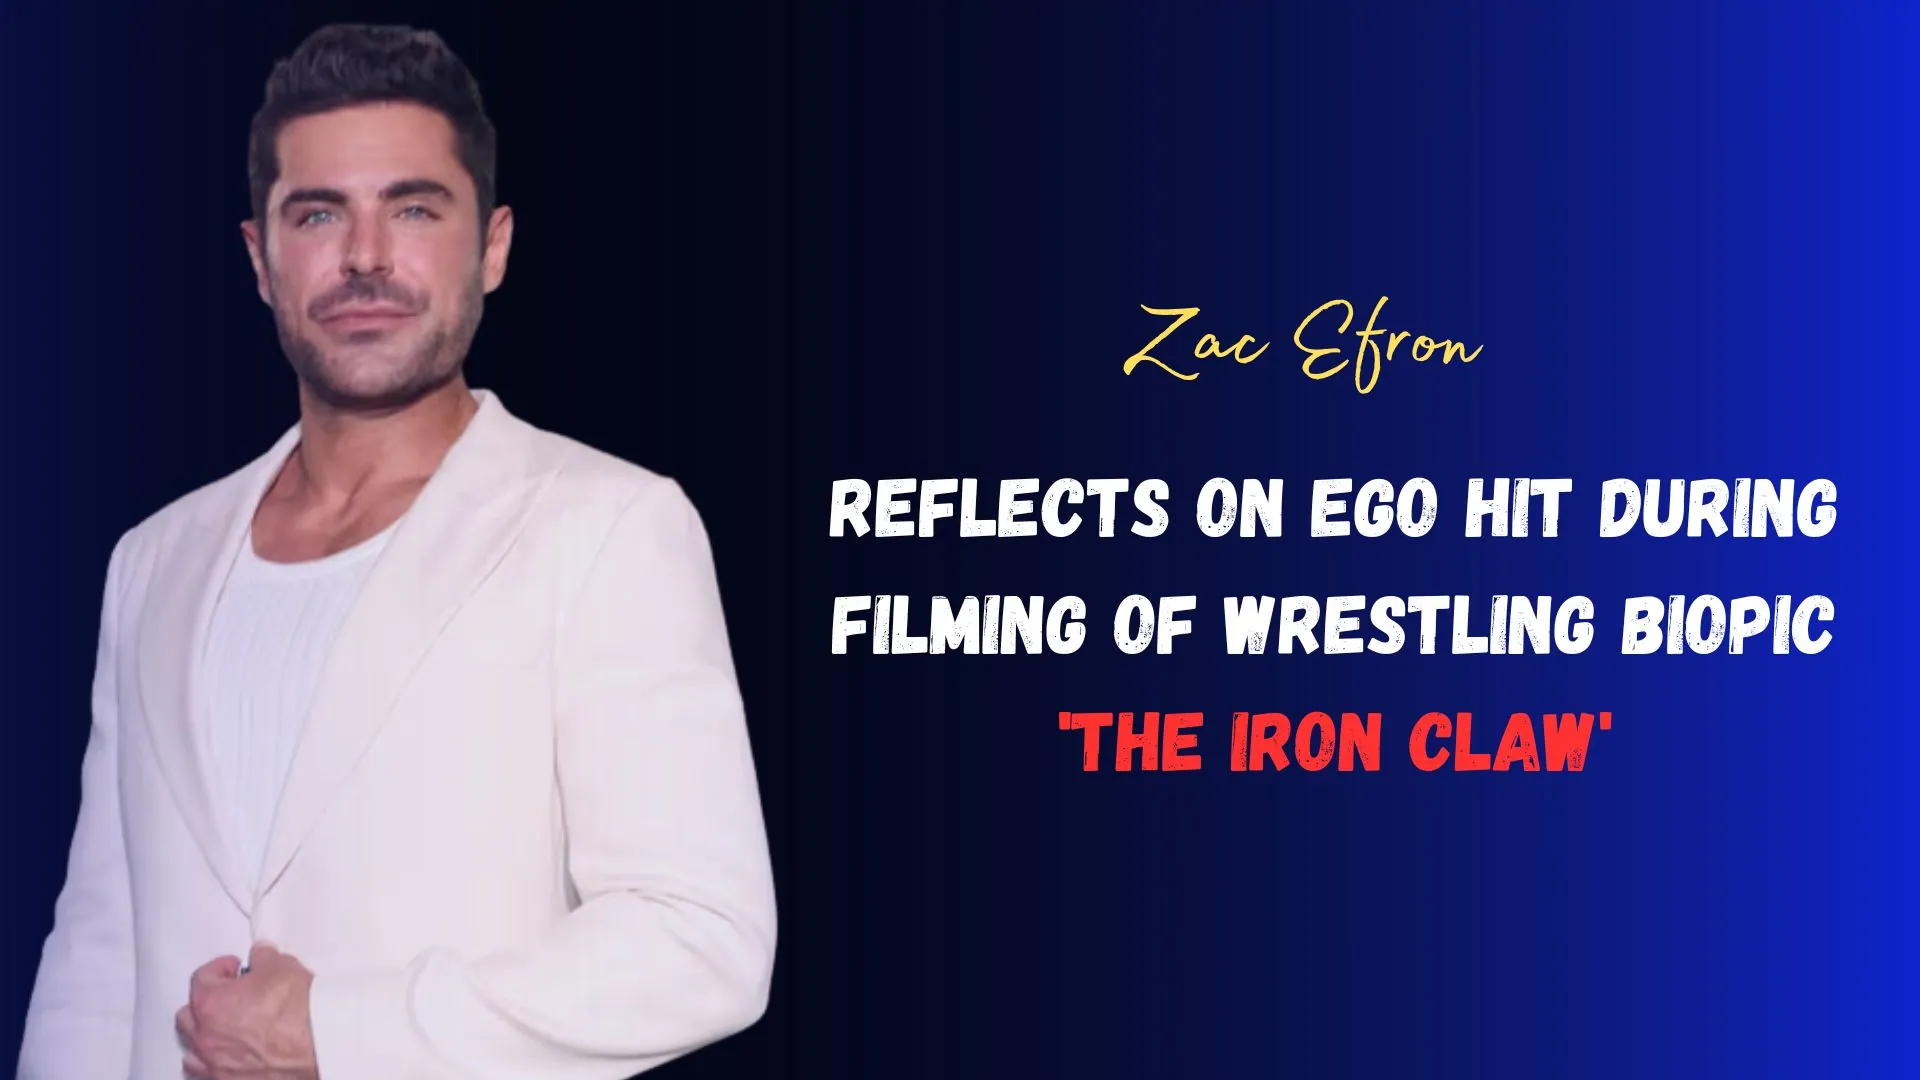 Zac Efron Reflects on Ego Hit During Filming of Wrestling Biopic 'The Iron Claw'